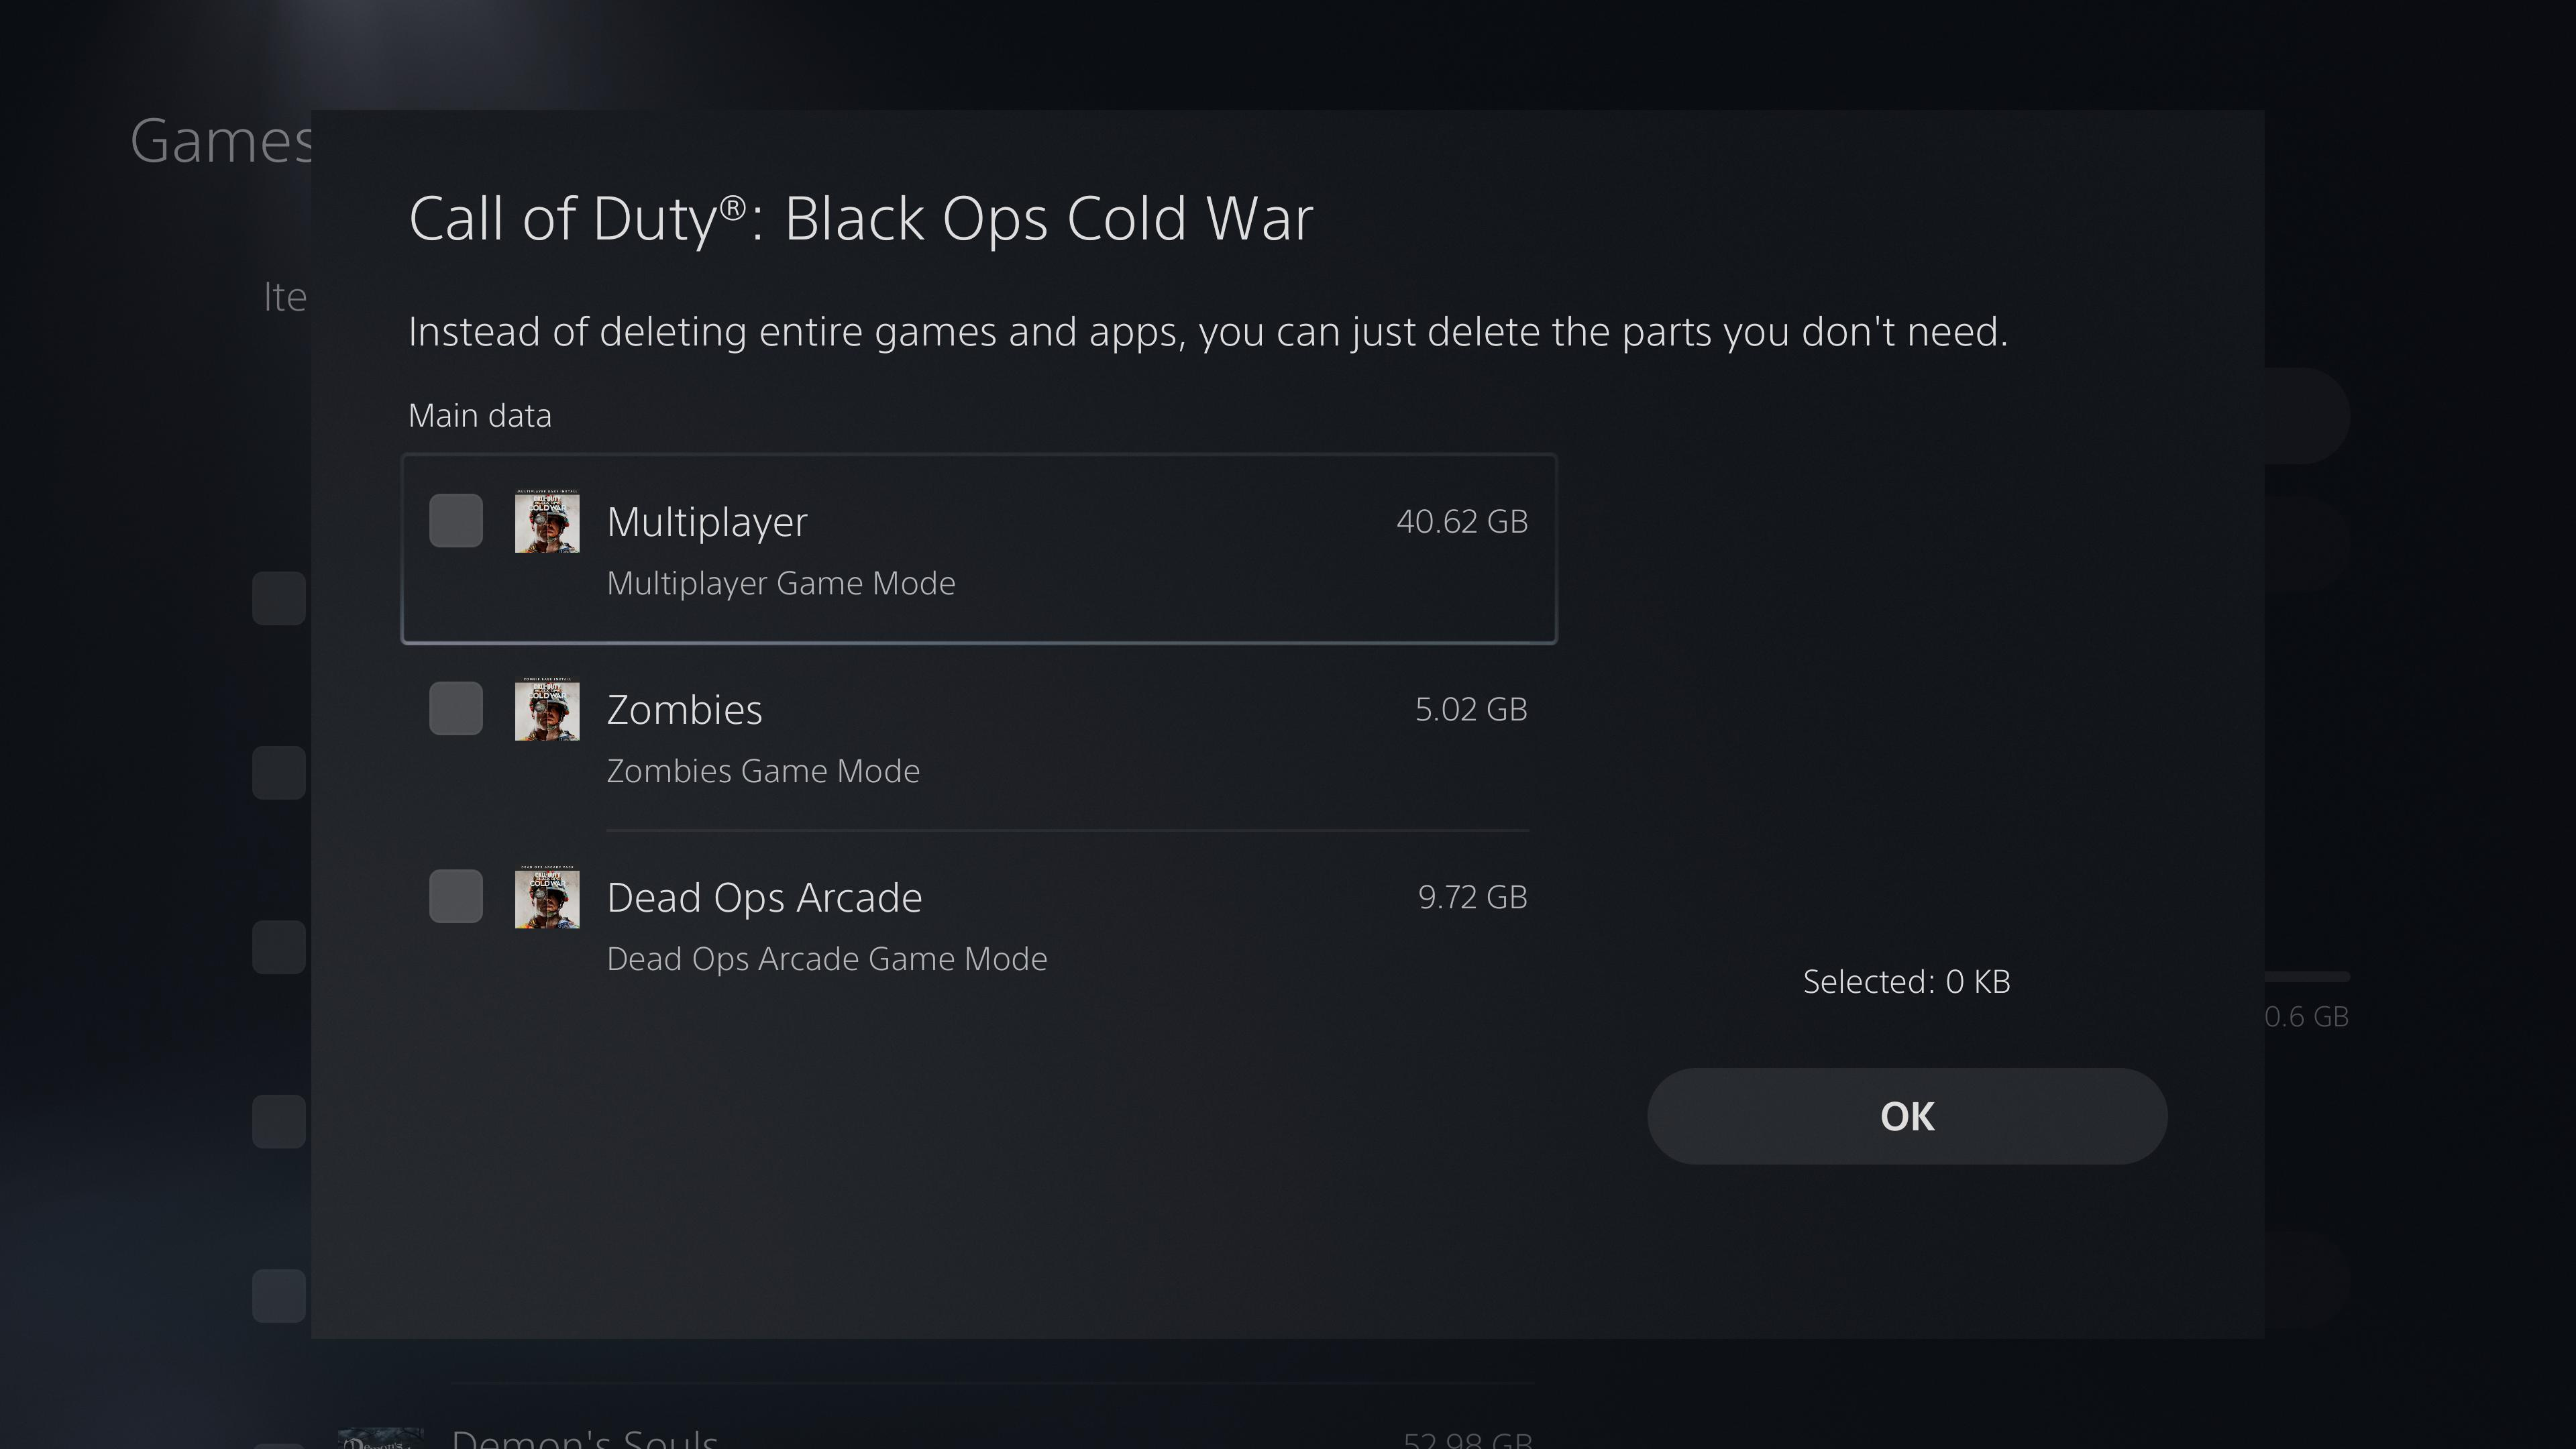 call of duty cold war ps5 release date uk